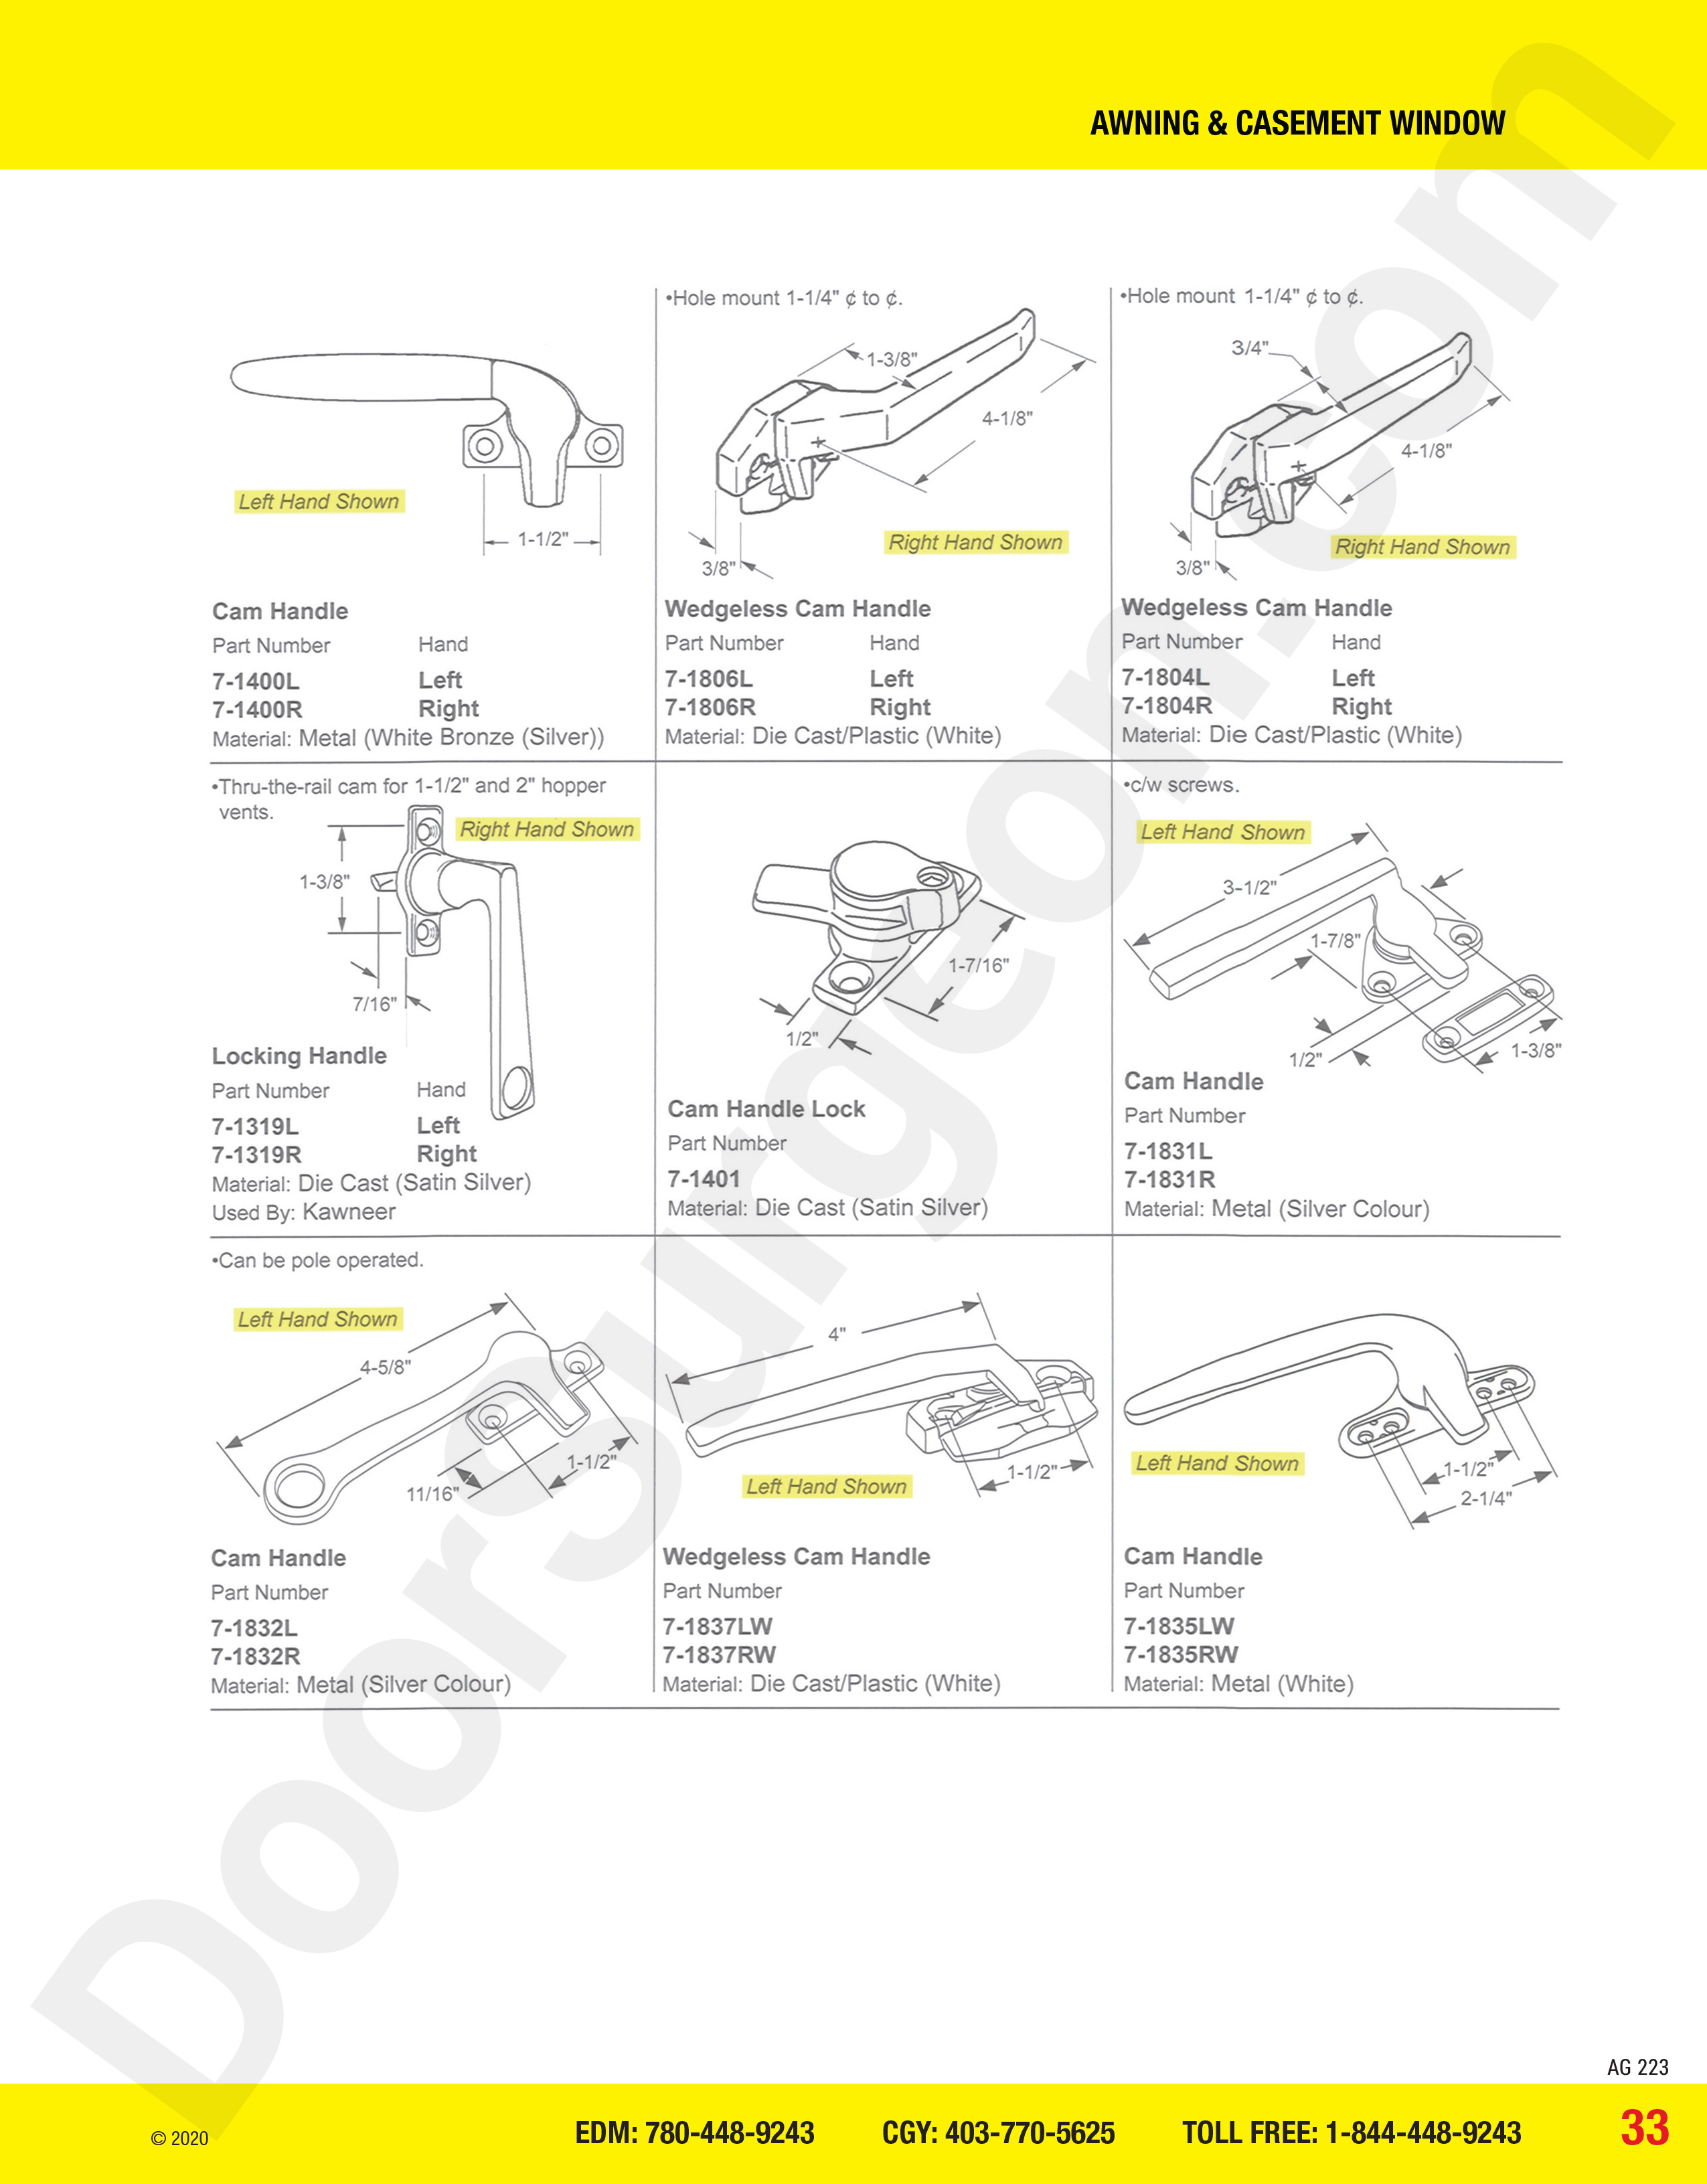 awning and casement window parts for cam handles and locks